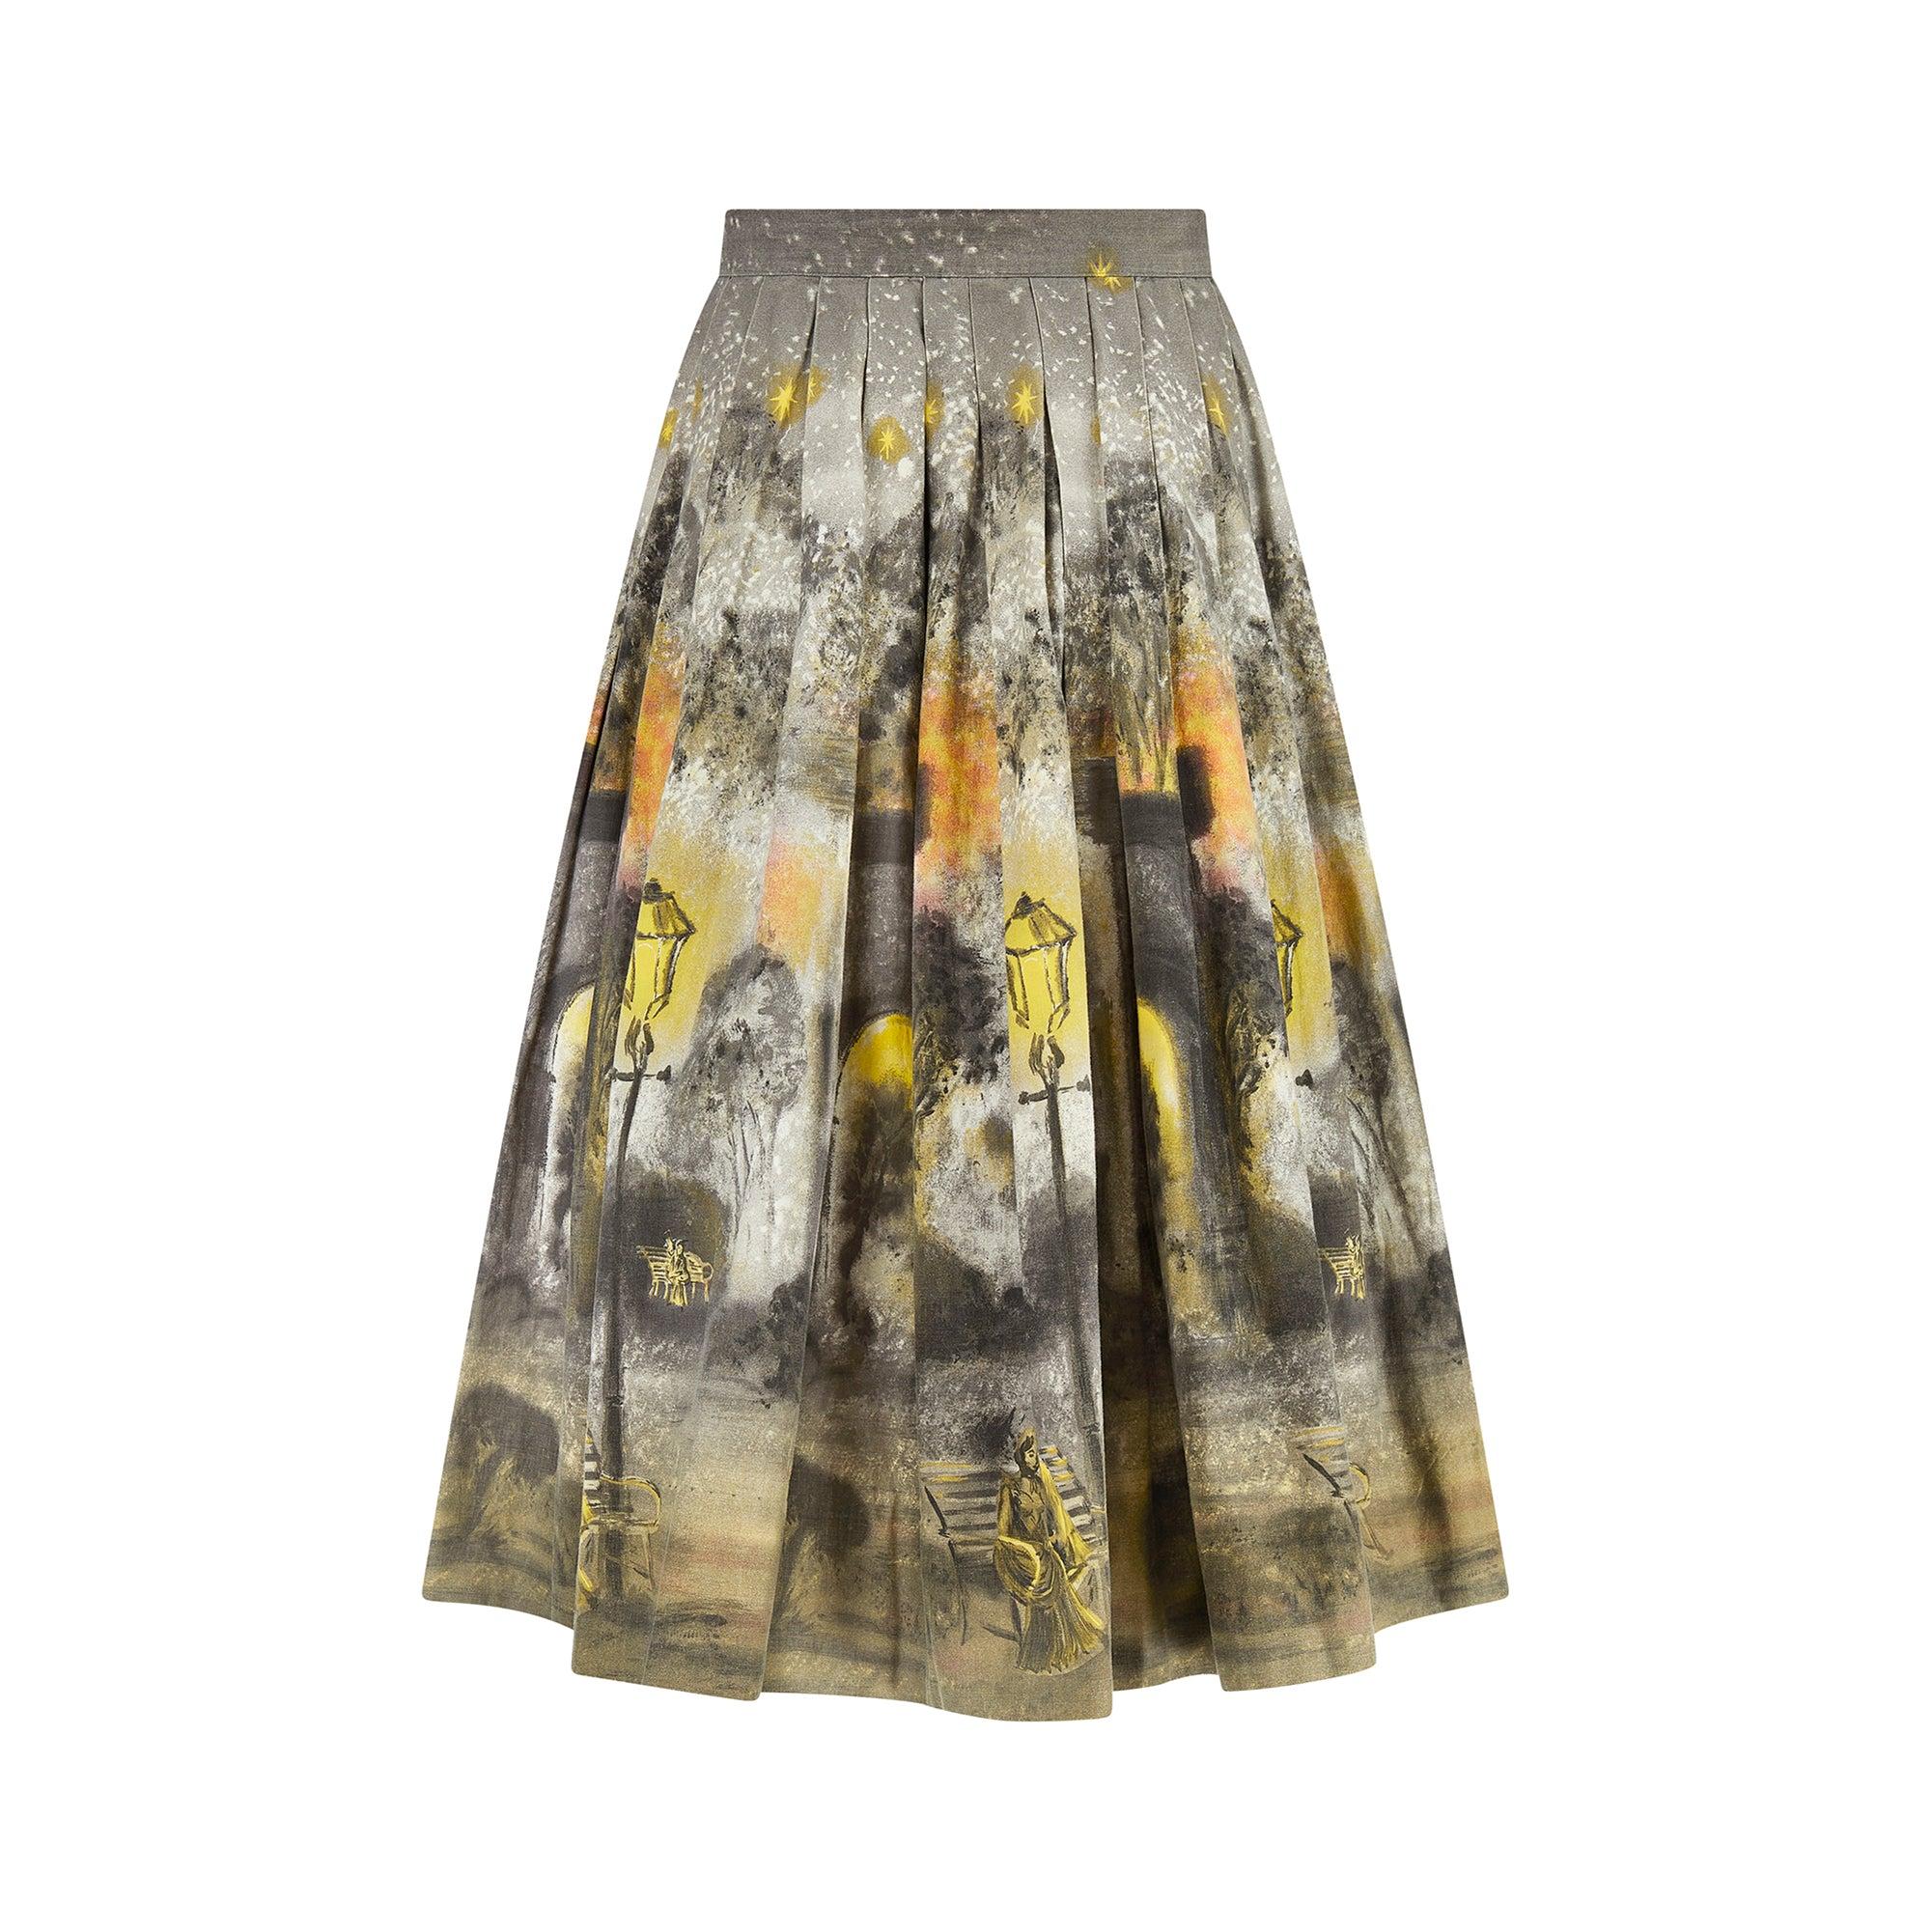 1950s Box Pleat Novelty Print Night Scene Skirt In Excellent Condition For Sale In London, GB